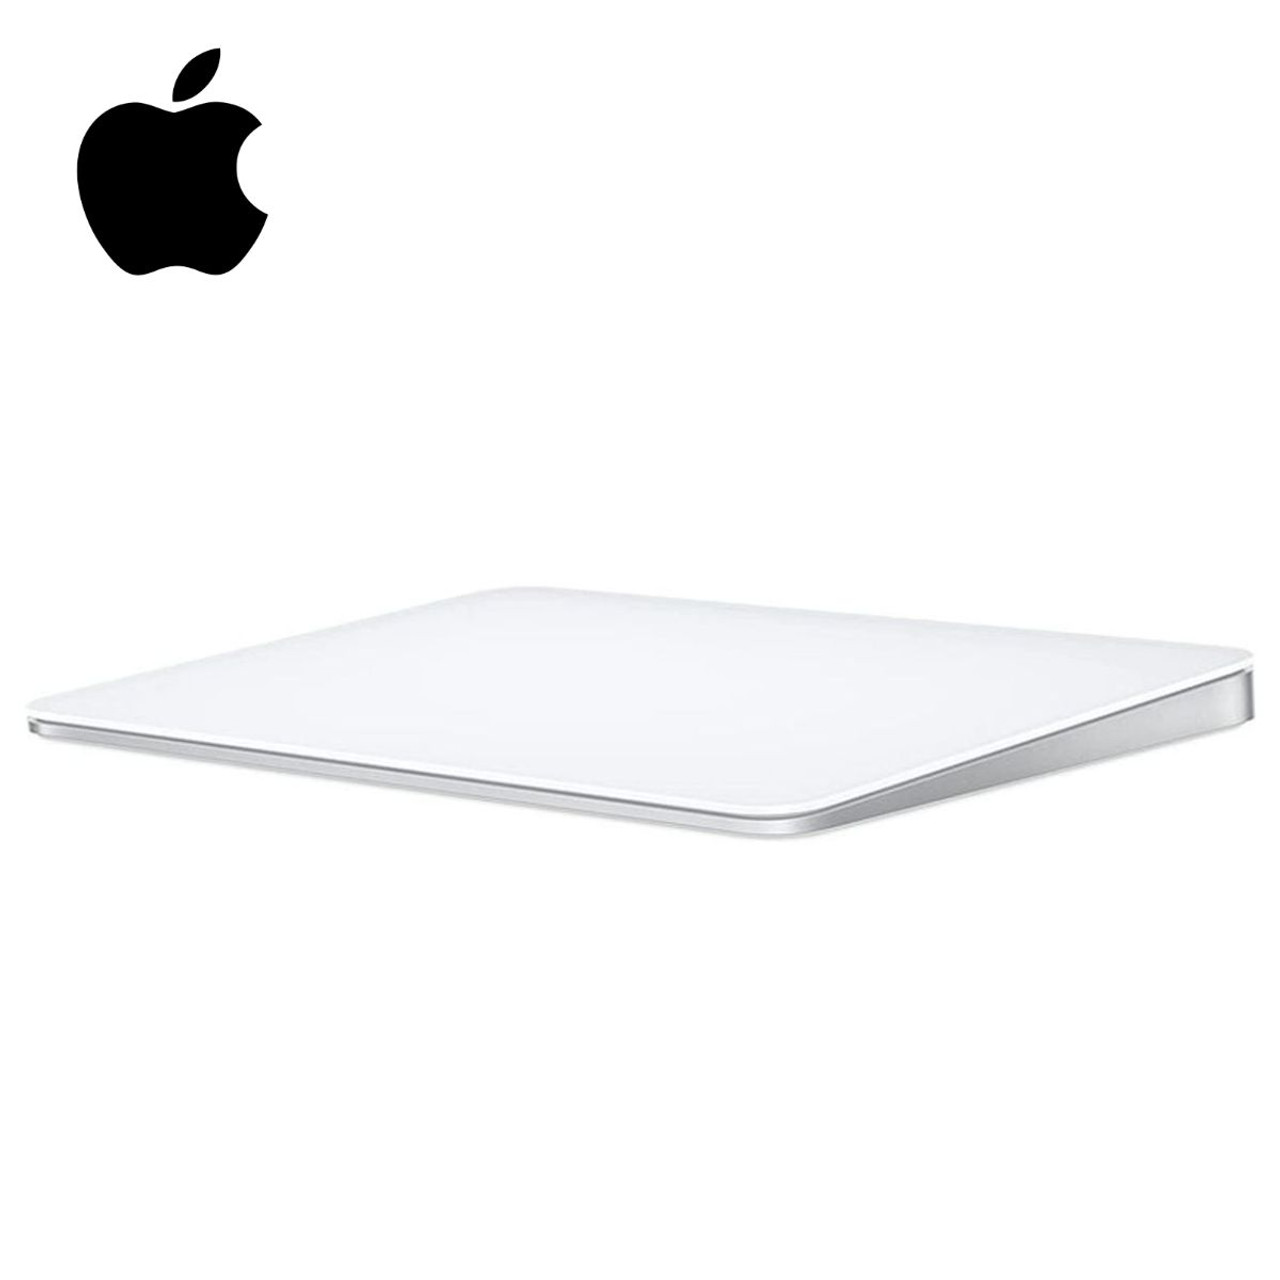 Apple Magic Trackpad - Black Multi-Touch Surface ​​​​​​​